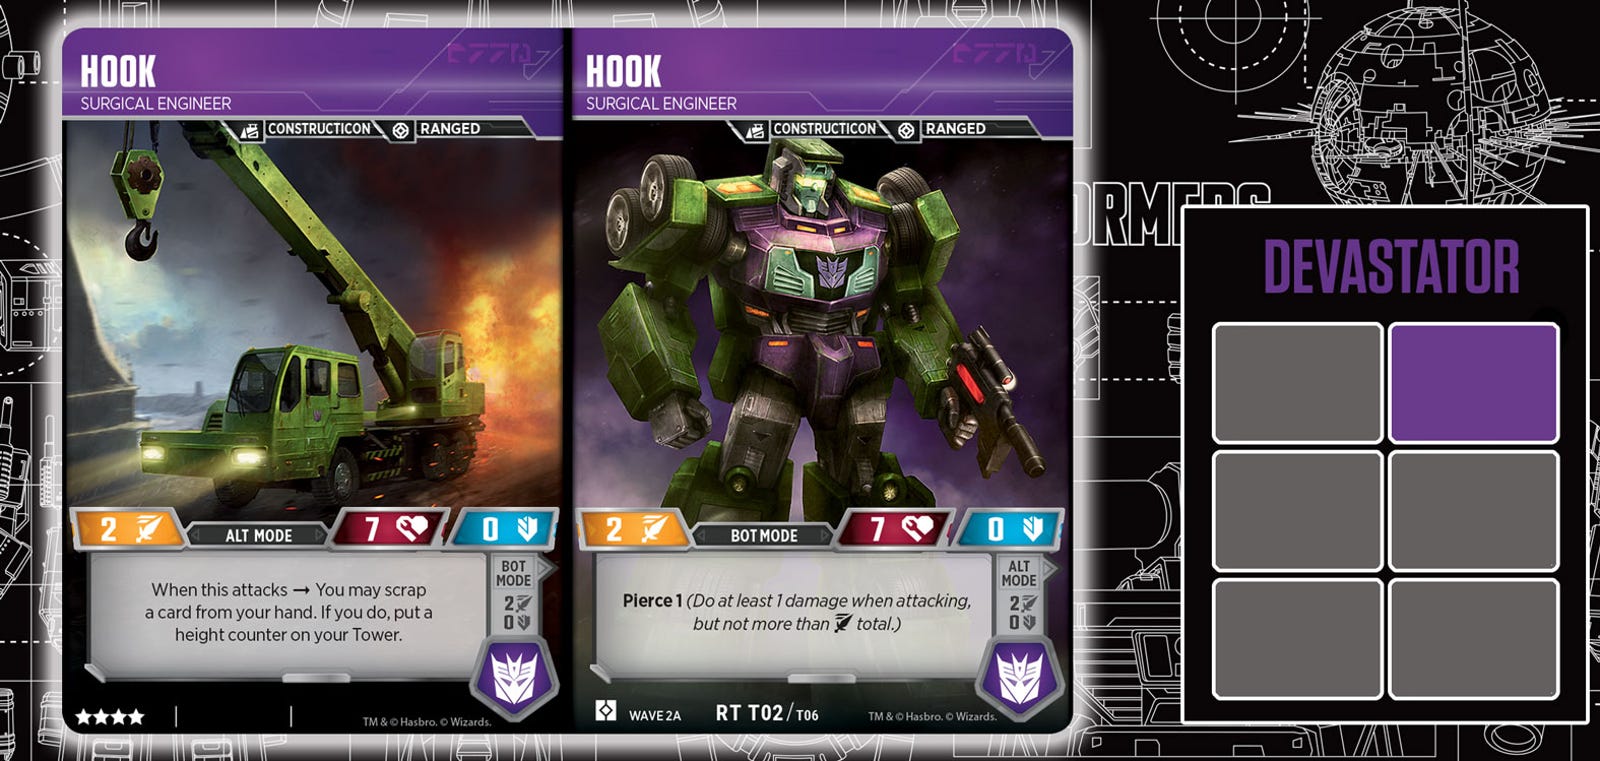 Transformers News: New Starscream Card Revealed For Official Transformers Trading Card Game And In-depth Analysis